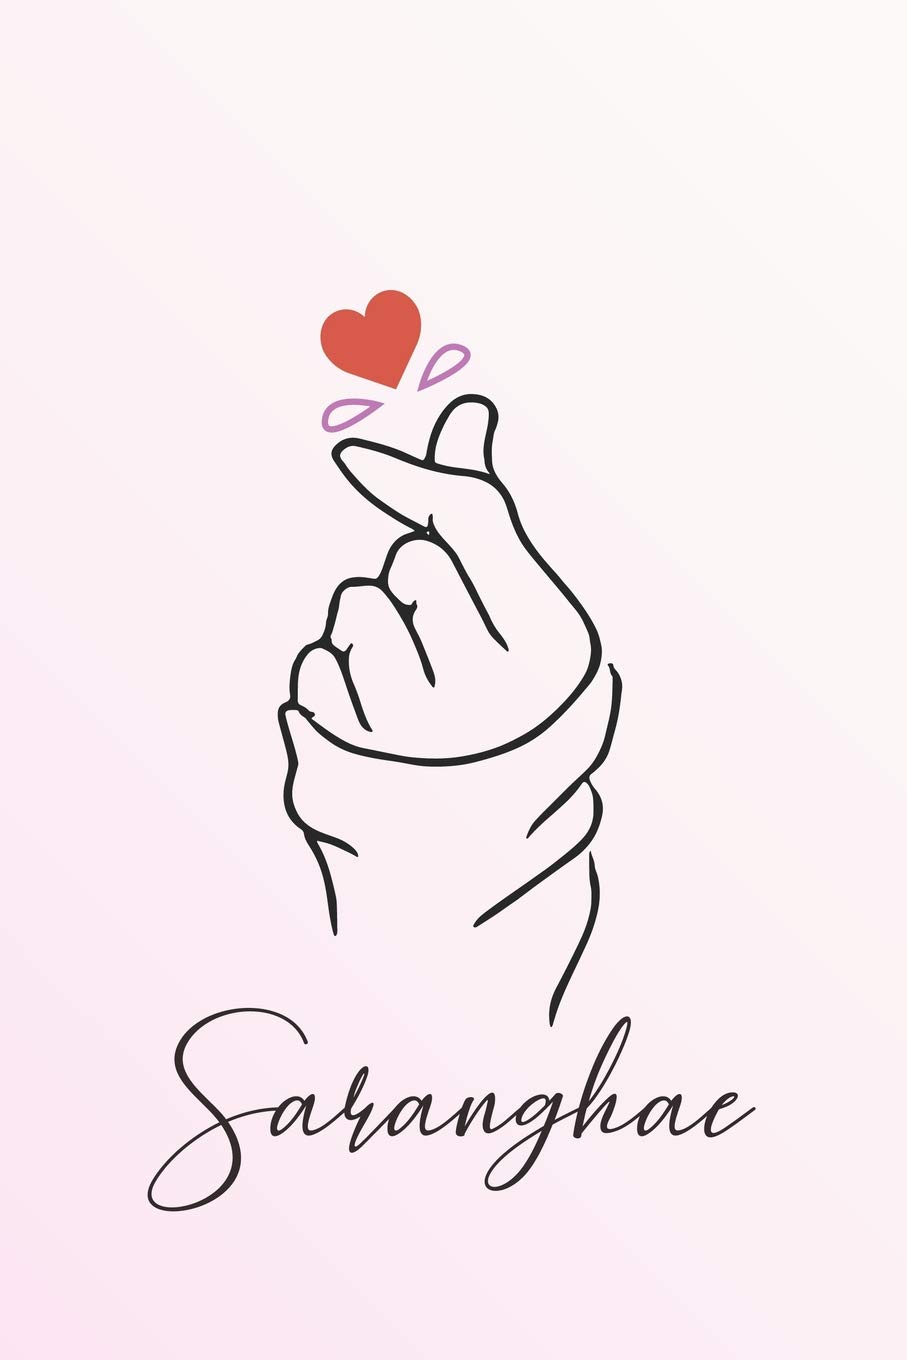 500 Finger Heart Wallpapers  Background Beautiful Best Available For  Download Finger Heart Images Free On Zicxacomphotos  Zicxa Photos